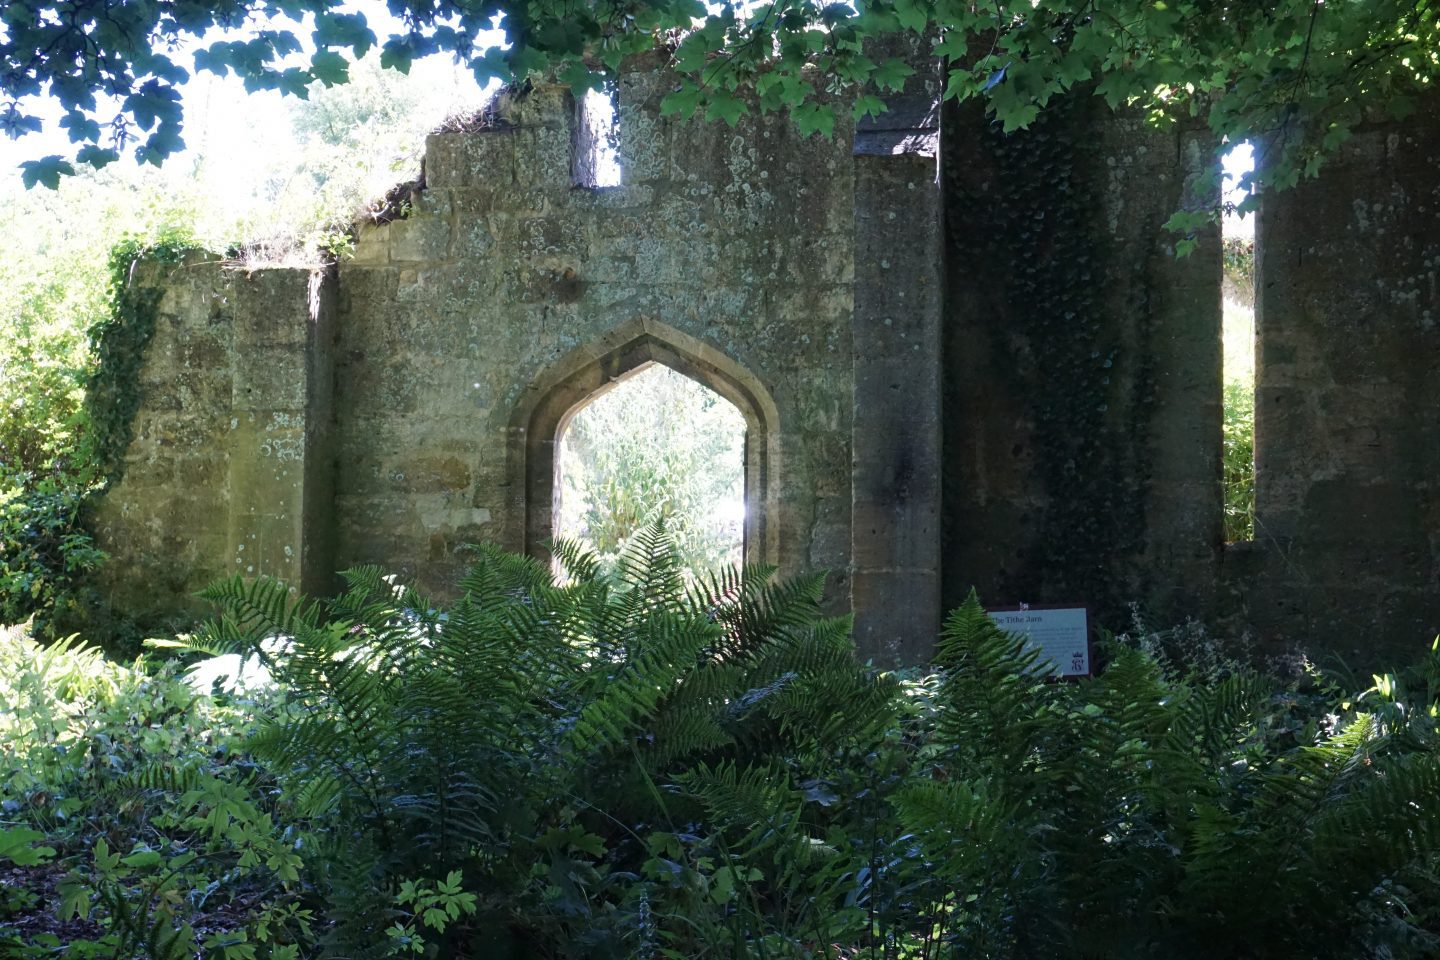 Ruins at Sudeley Castle viewed from among trees along the path